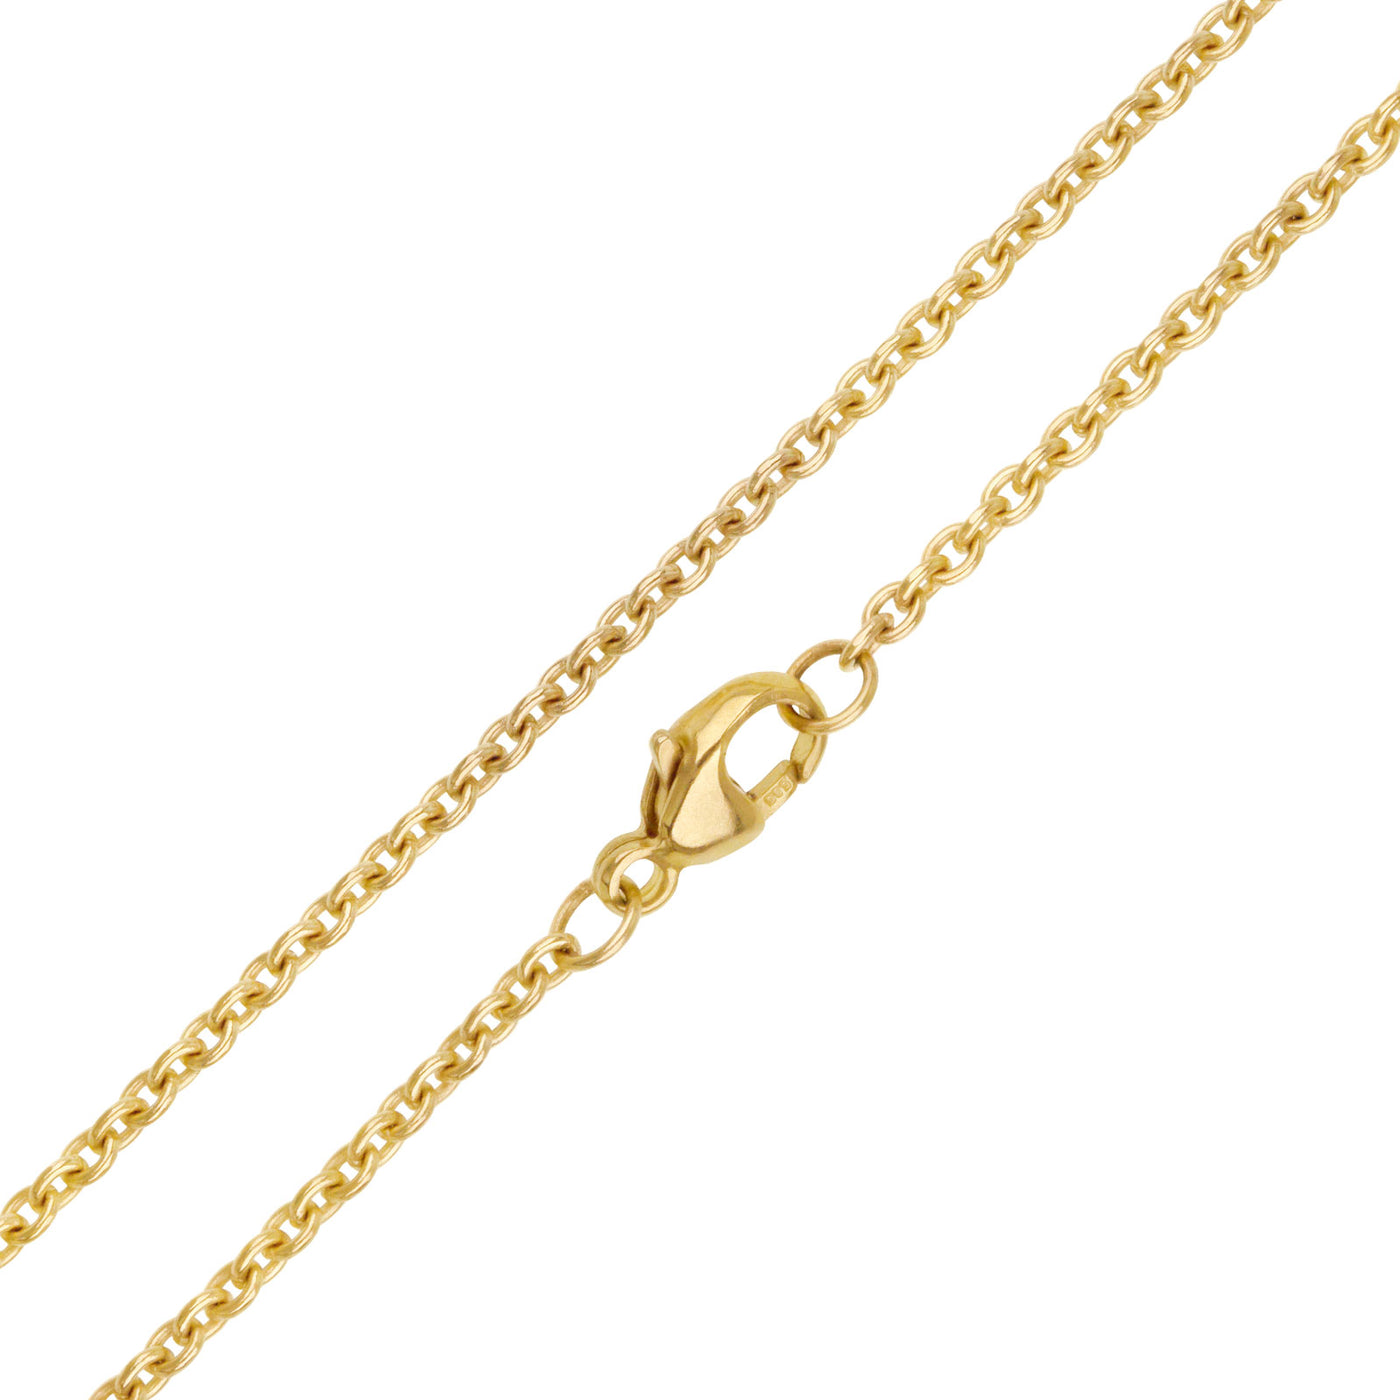 2mm solid 14k gold cable chain